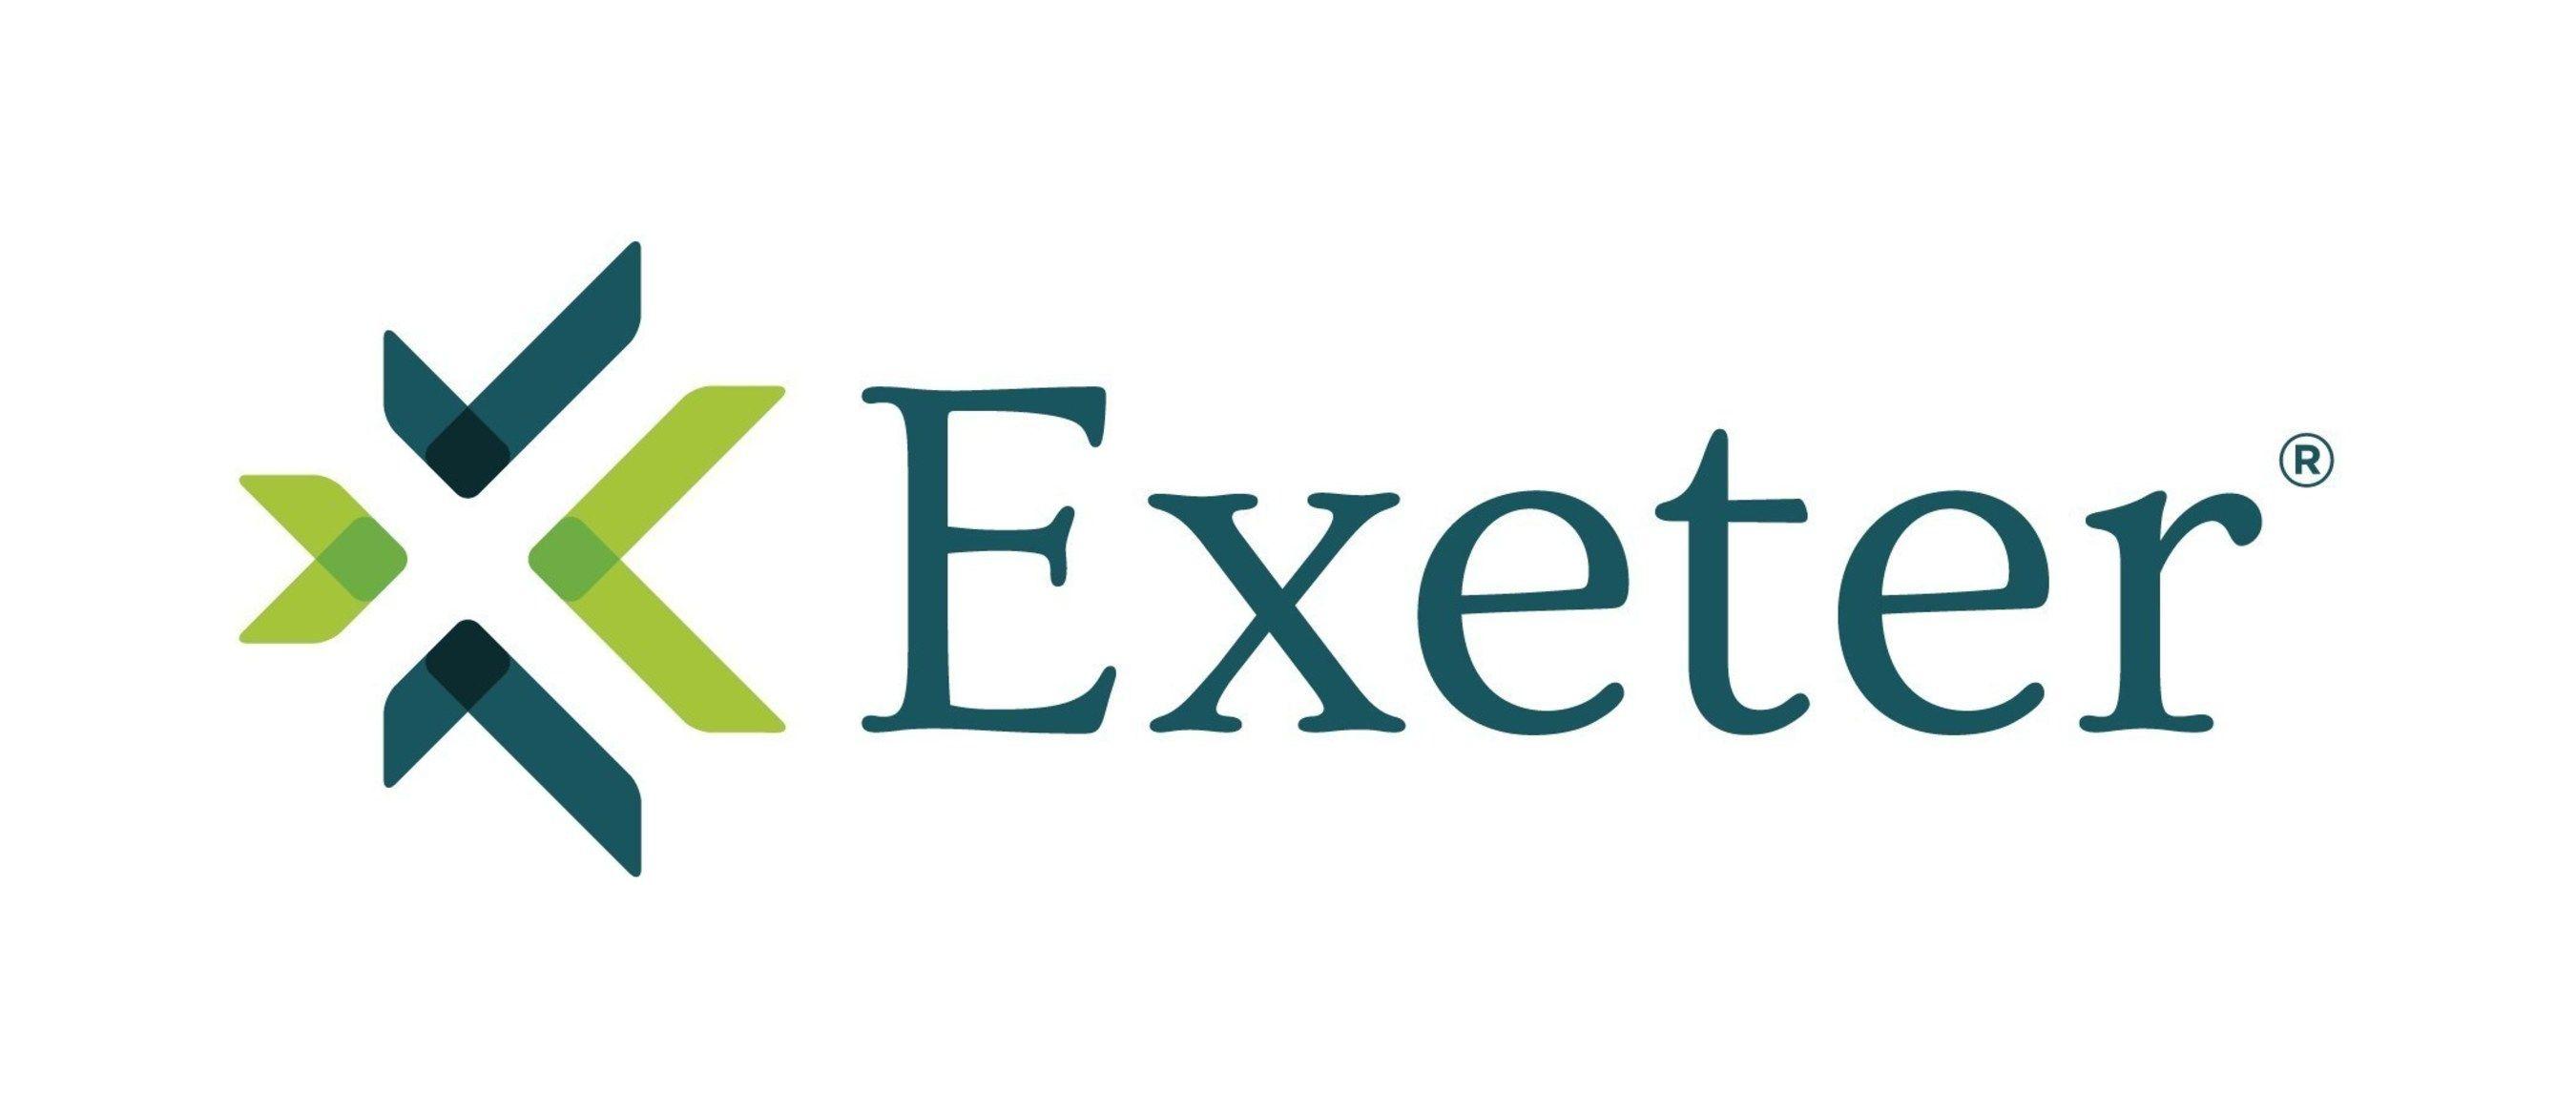 Exeter Logo - Exeter Finance Corp. Announces Rebranding With New Company Logo In ...